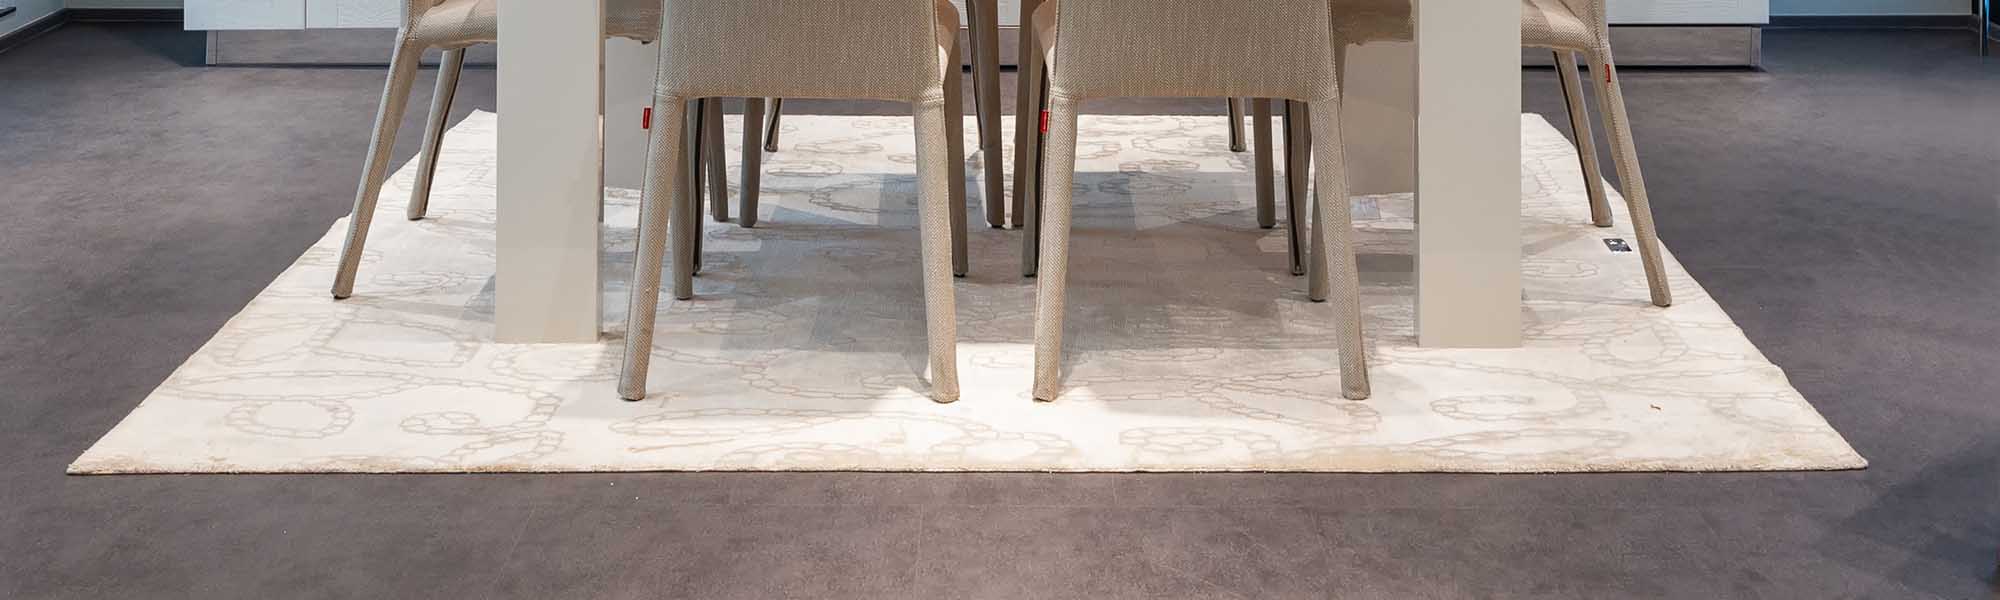 A beige kitchen mat on which the dining table stands